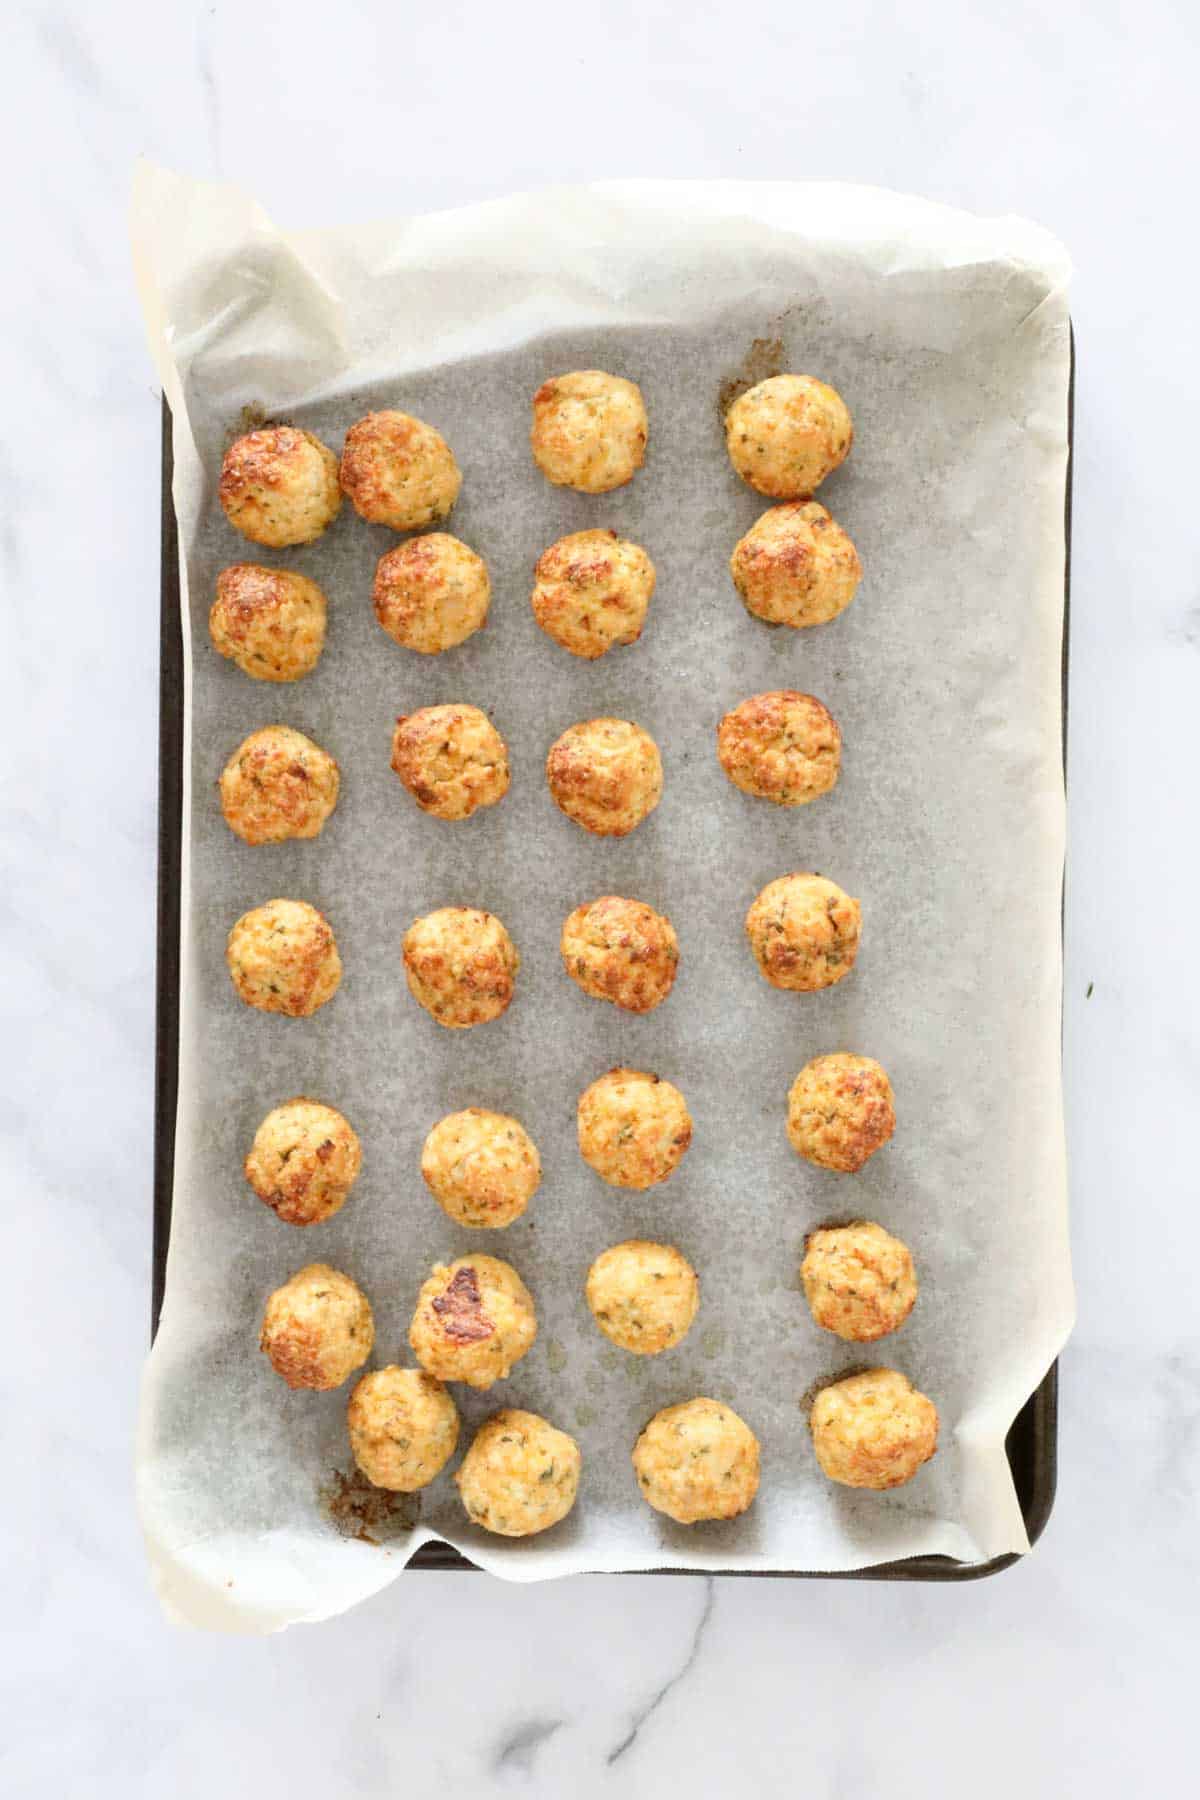 Golden baked meatballs on a baking tray.